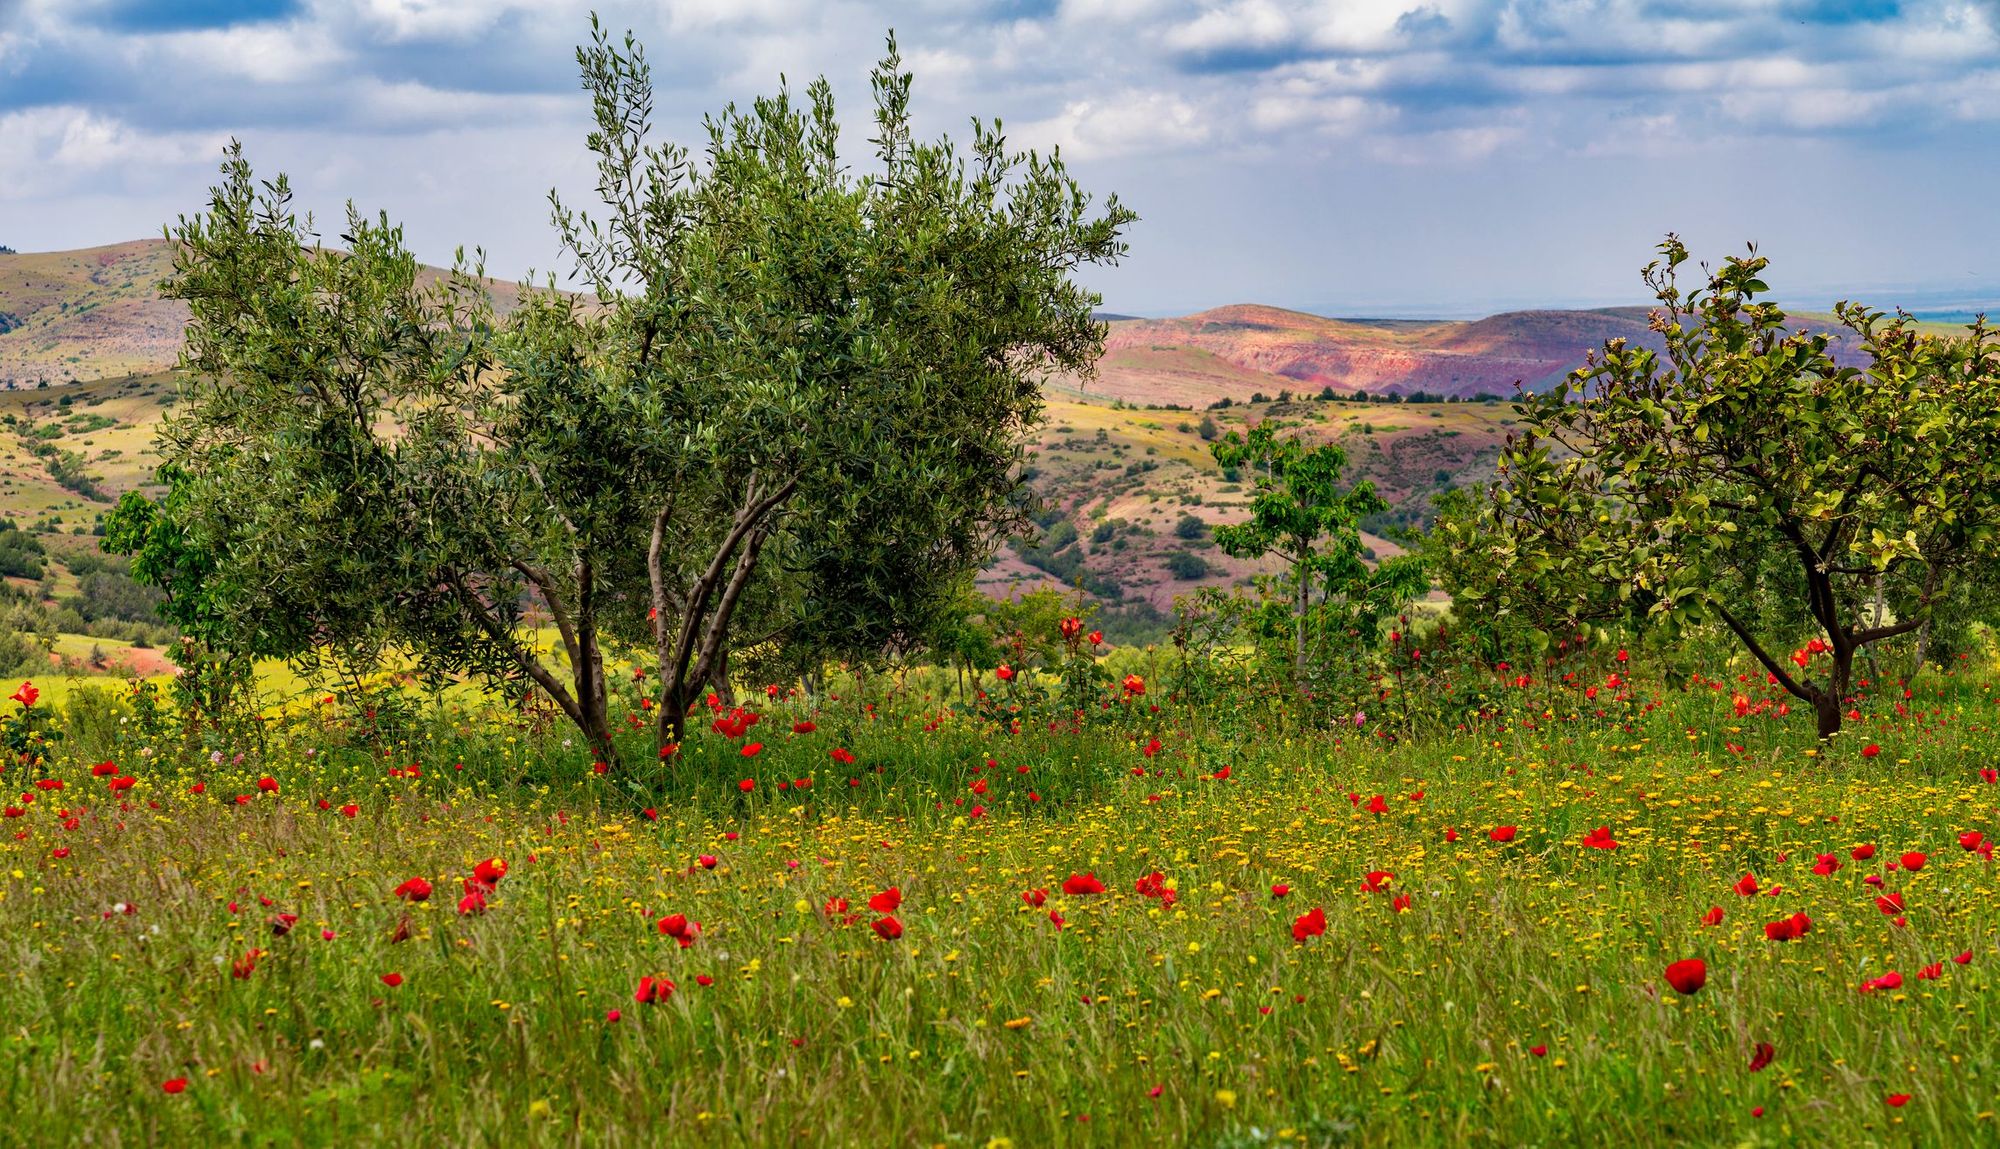 The lush landscape of a mountain meadow in Morocco, with the Atlas Mountains behind.